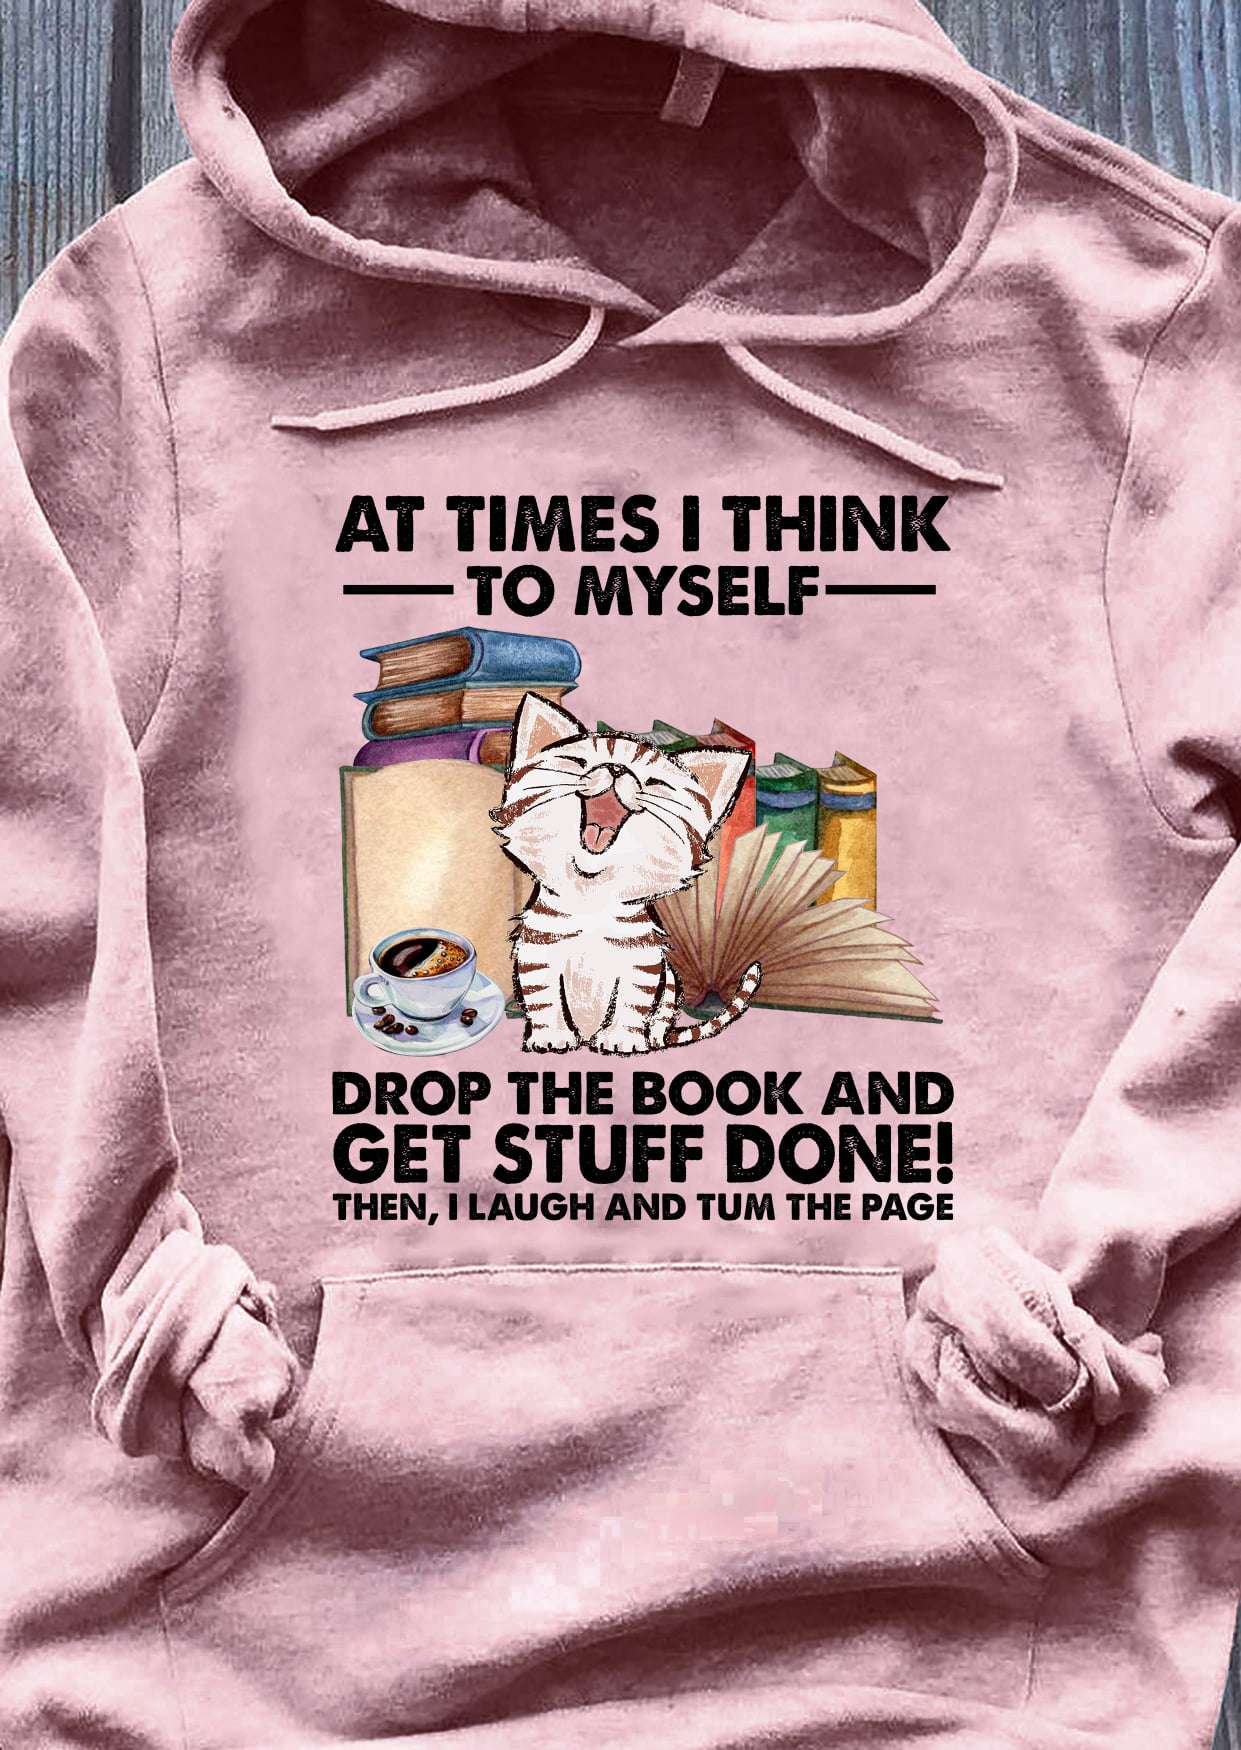 At times I think to myself - Drop the book and get stuff done, kitty cat and books, the bookaholic graphic T-shirt